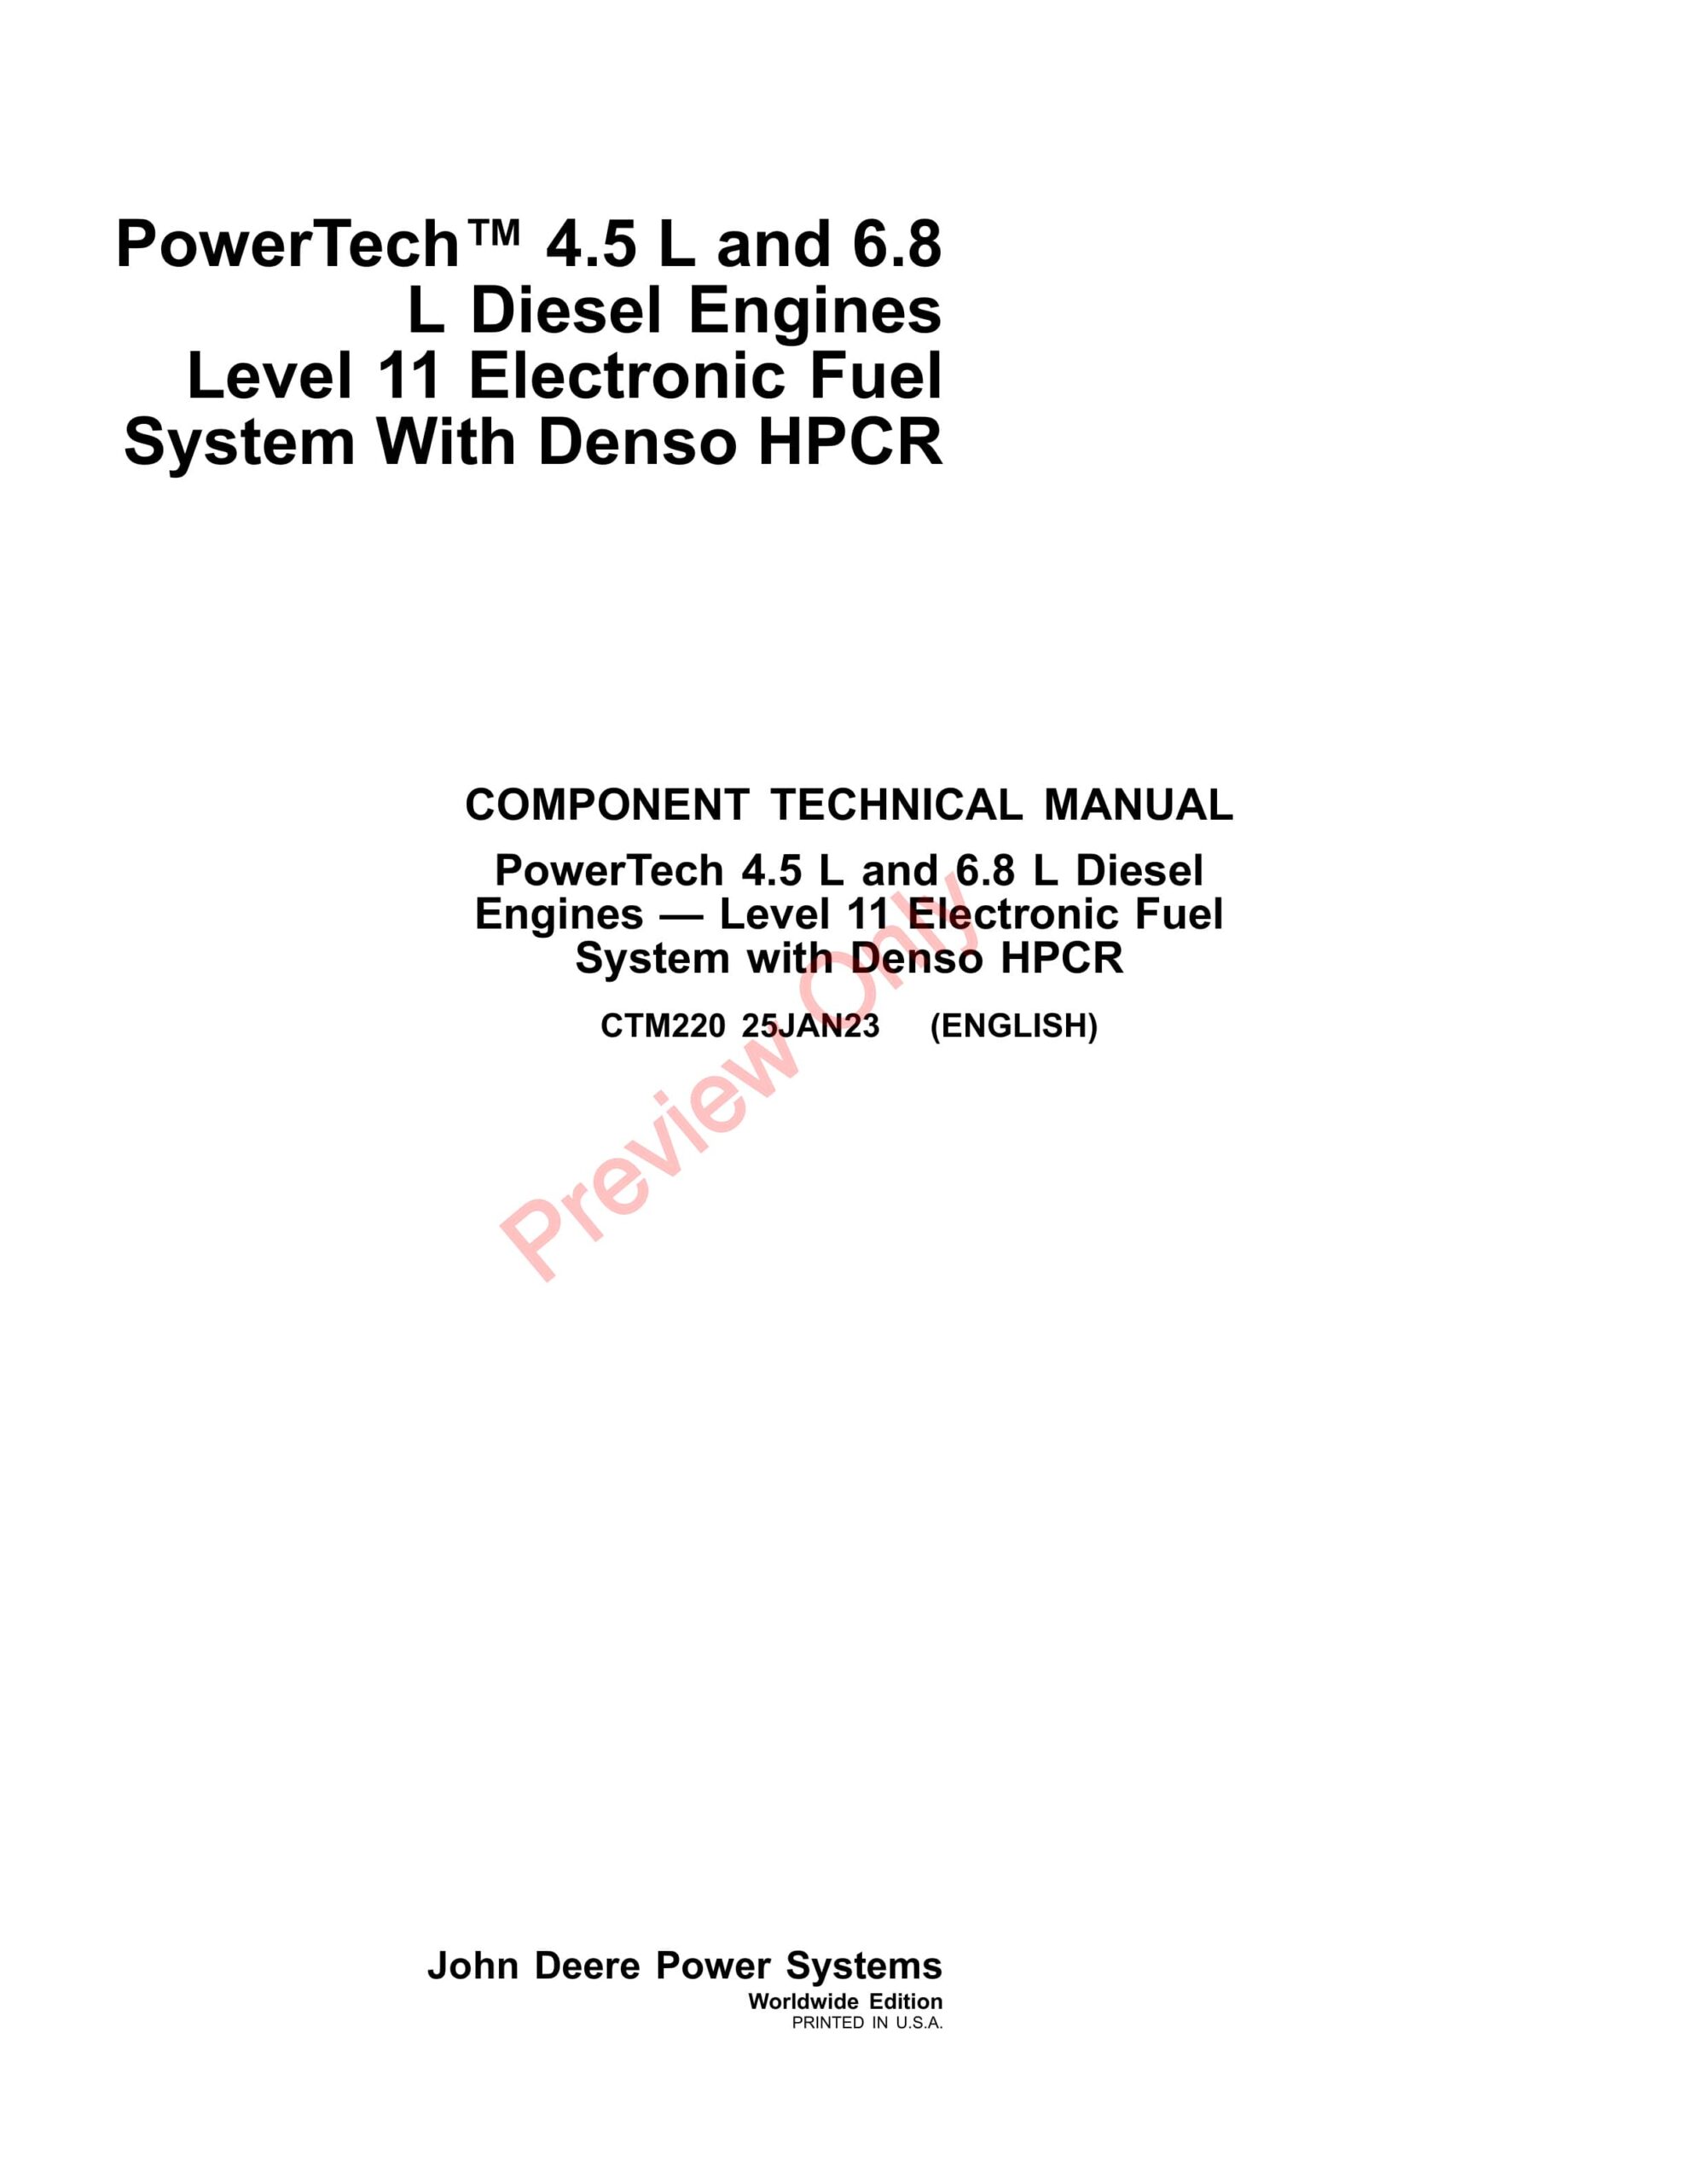 John Deere PowerTech 4.5 L and 6.8 L Diesel Engines, Level 11 Electronic Fuel System with Denso HPCR Component Technical Manual CTM220 25JAN23-1